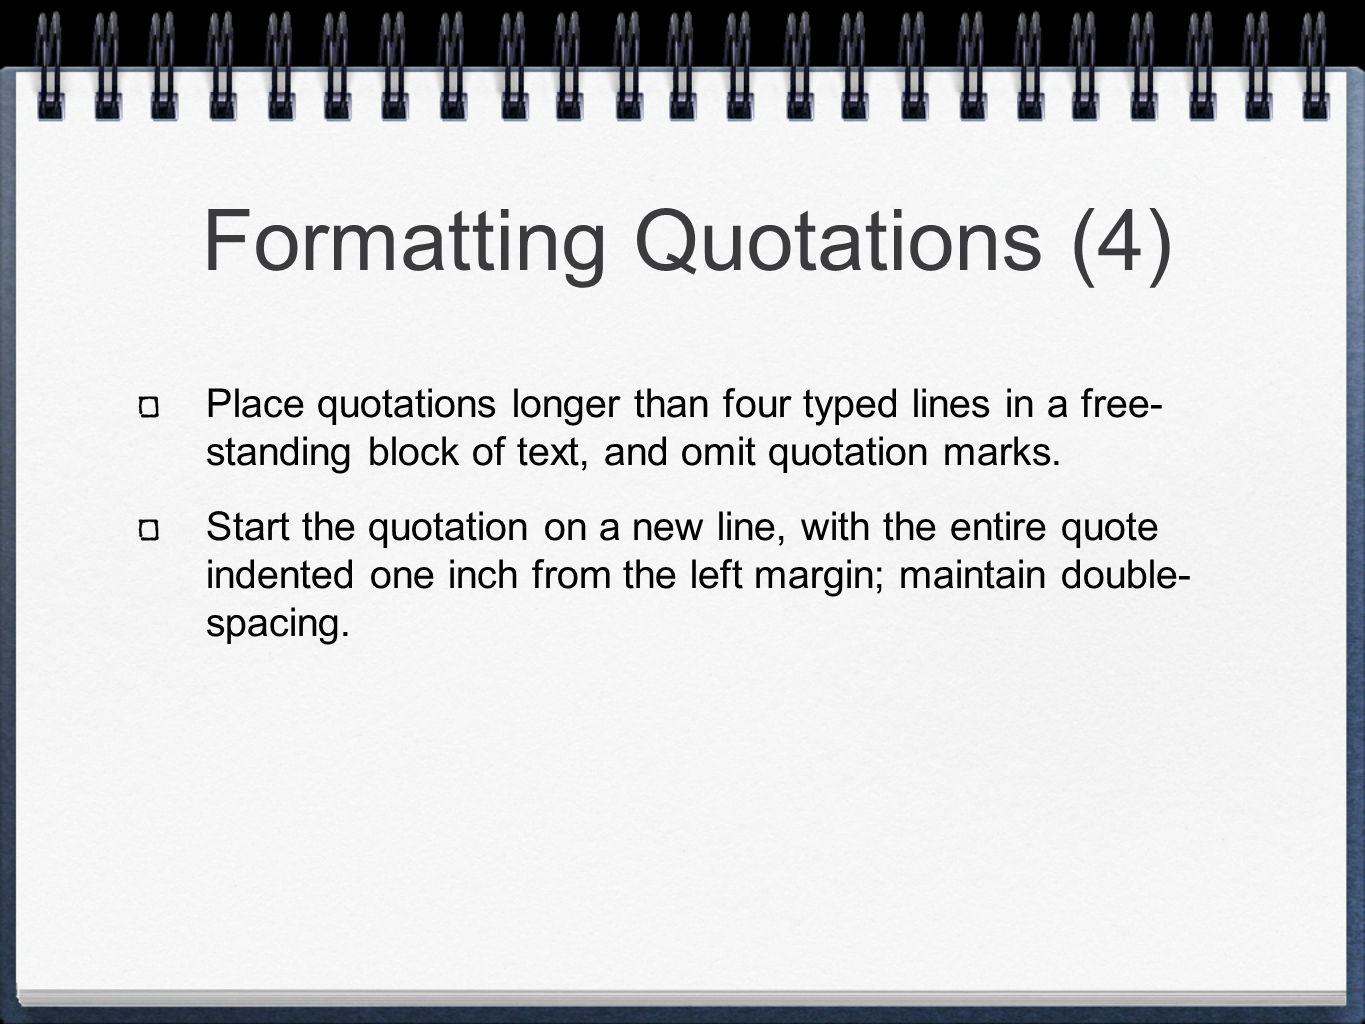 Formatting Quotations (4) Place quotations longer than four typed lines in a free- standing block of text, and omit quotation marks.